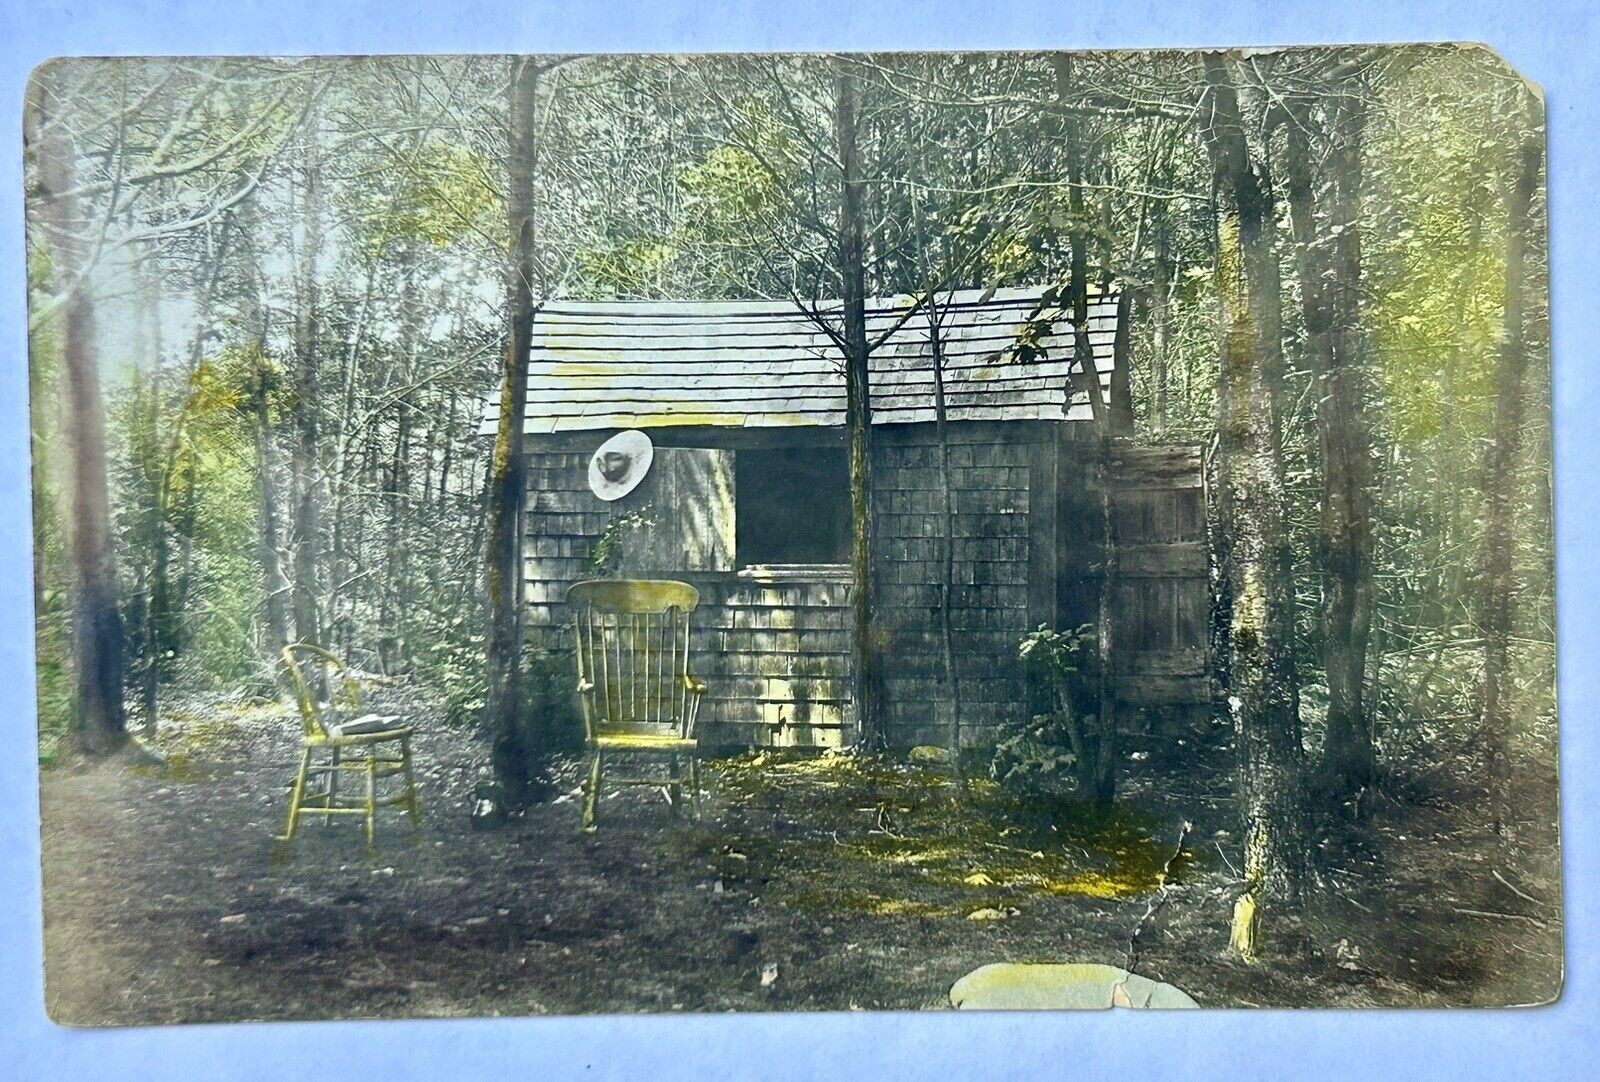 Cabin In Woods. Cowboy Hat And Chairs. RPPC? Vintage Postcard